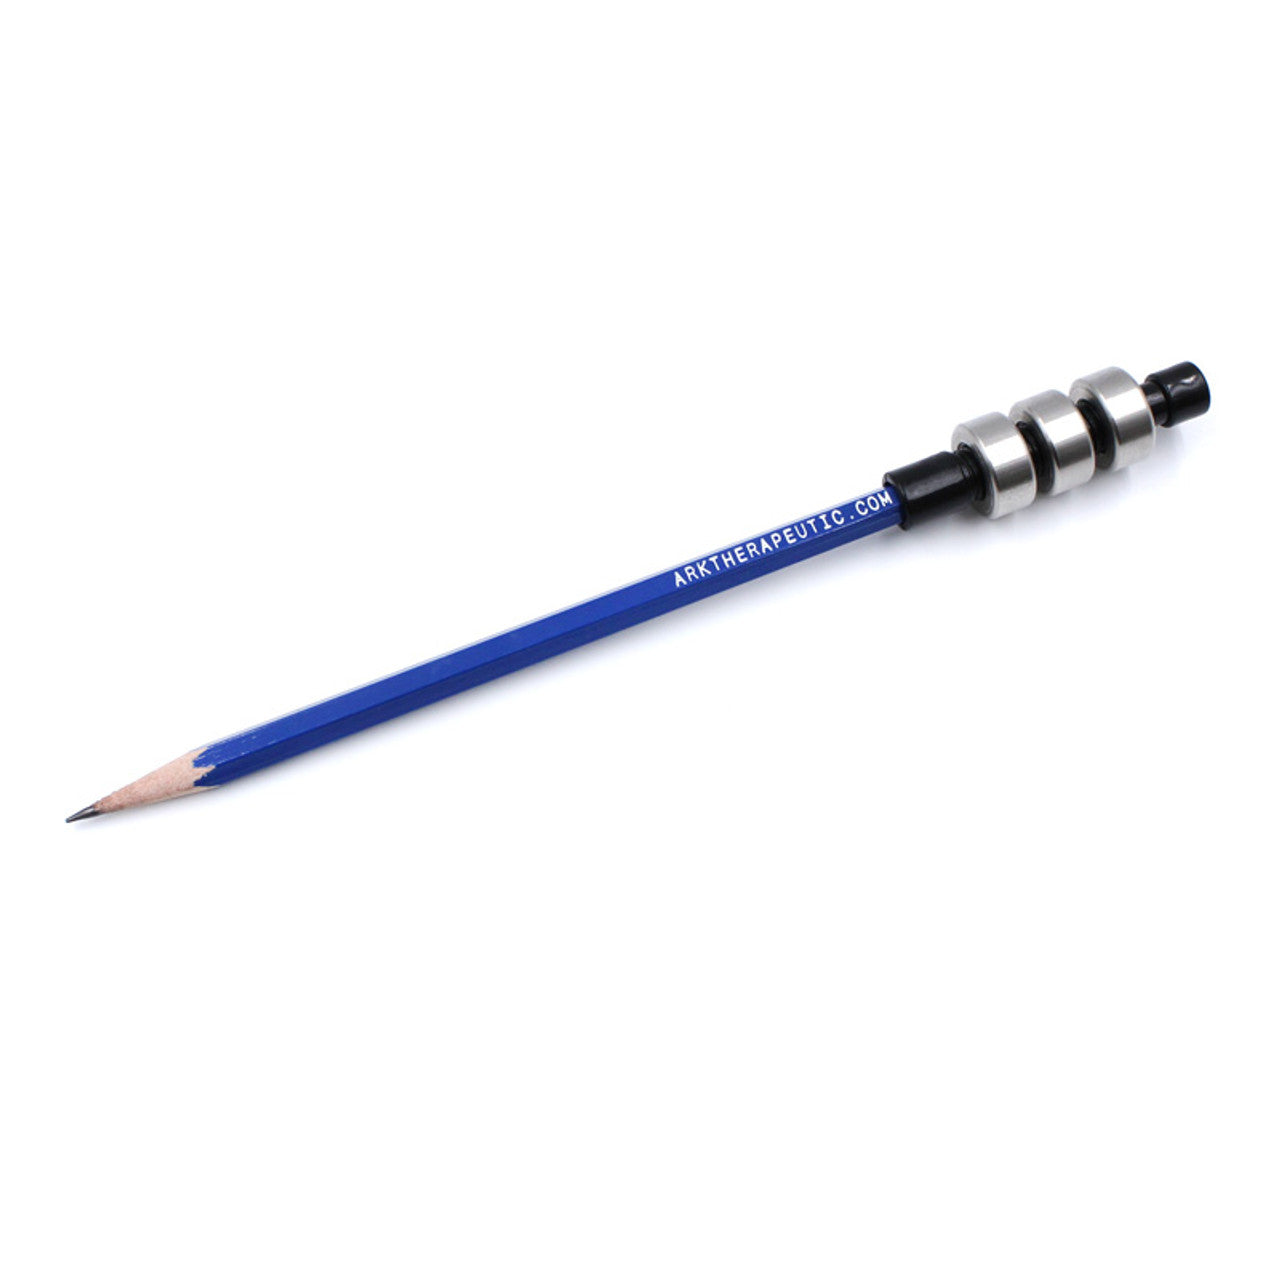 Ark Weighted Pencil - Adjustable Weight